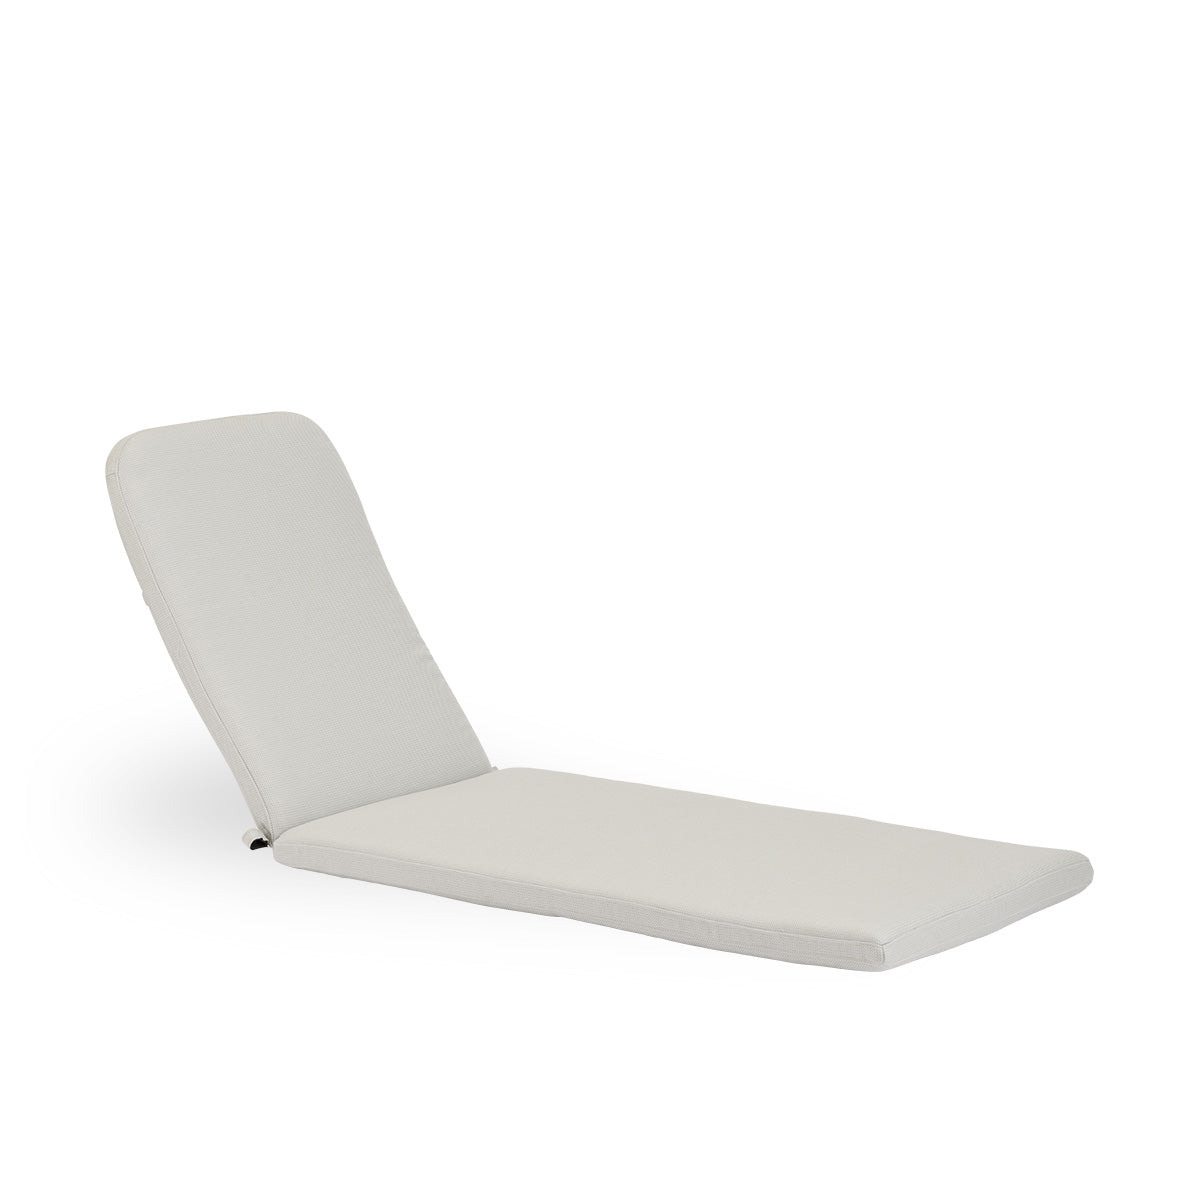 Daisy Exterior Sunbed | Seat & back cushion by Sika